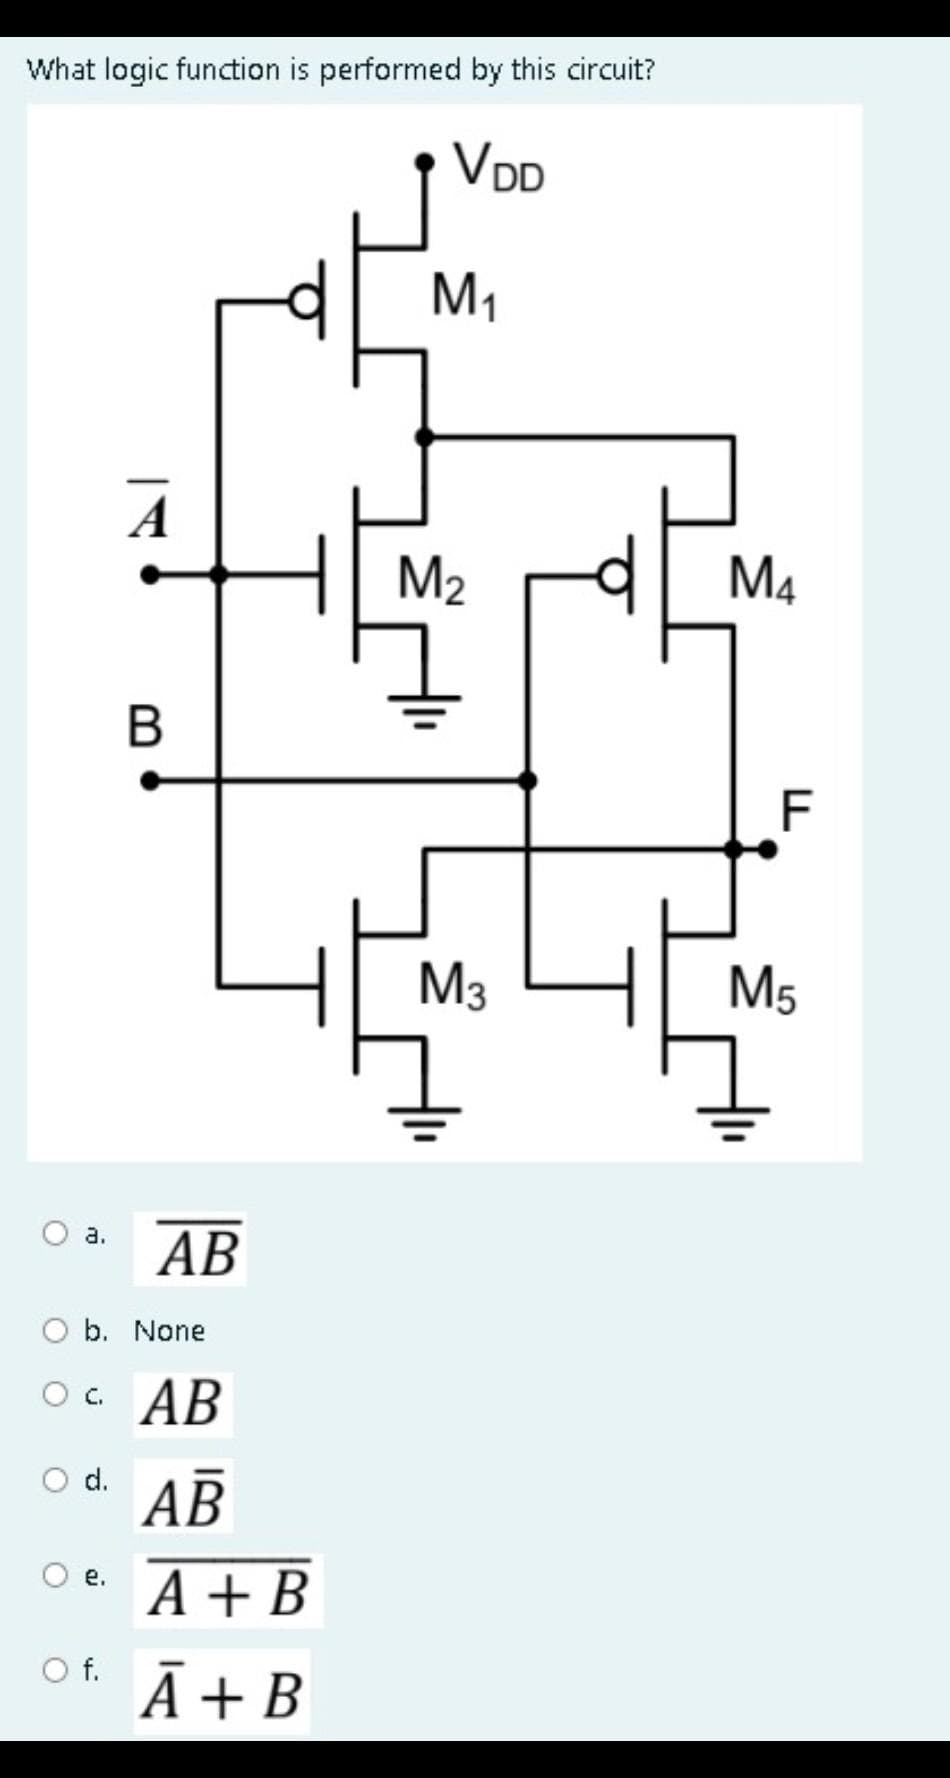 What logic function is performed by this circuit?
VDD
a.
O d.
e.
A
b. None
OC AB
AB
A+B
A+B
O f.
B
AB
M₁
M₂
M3
M4
F
M5